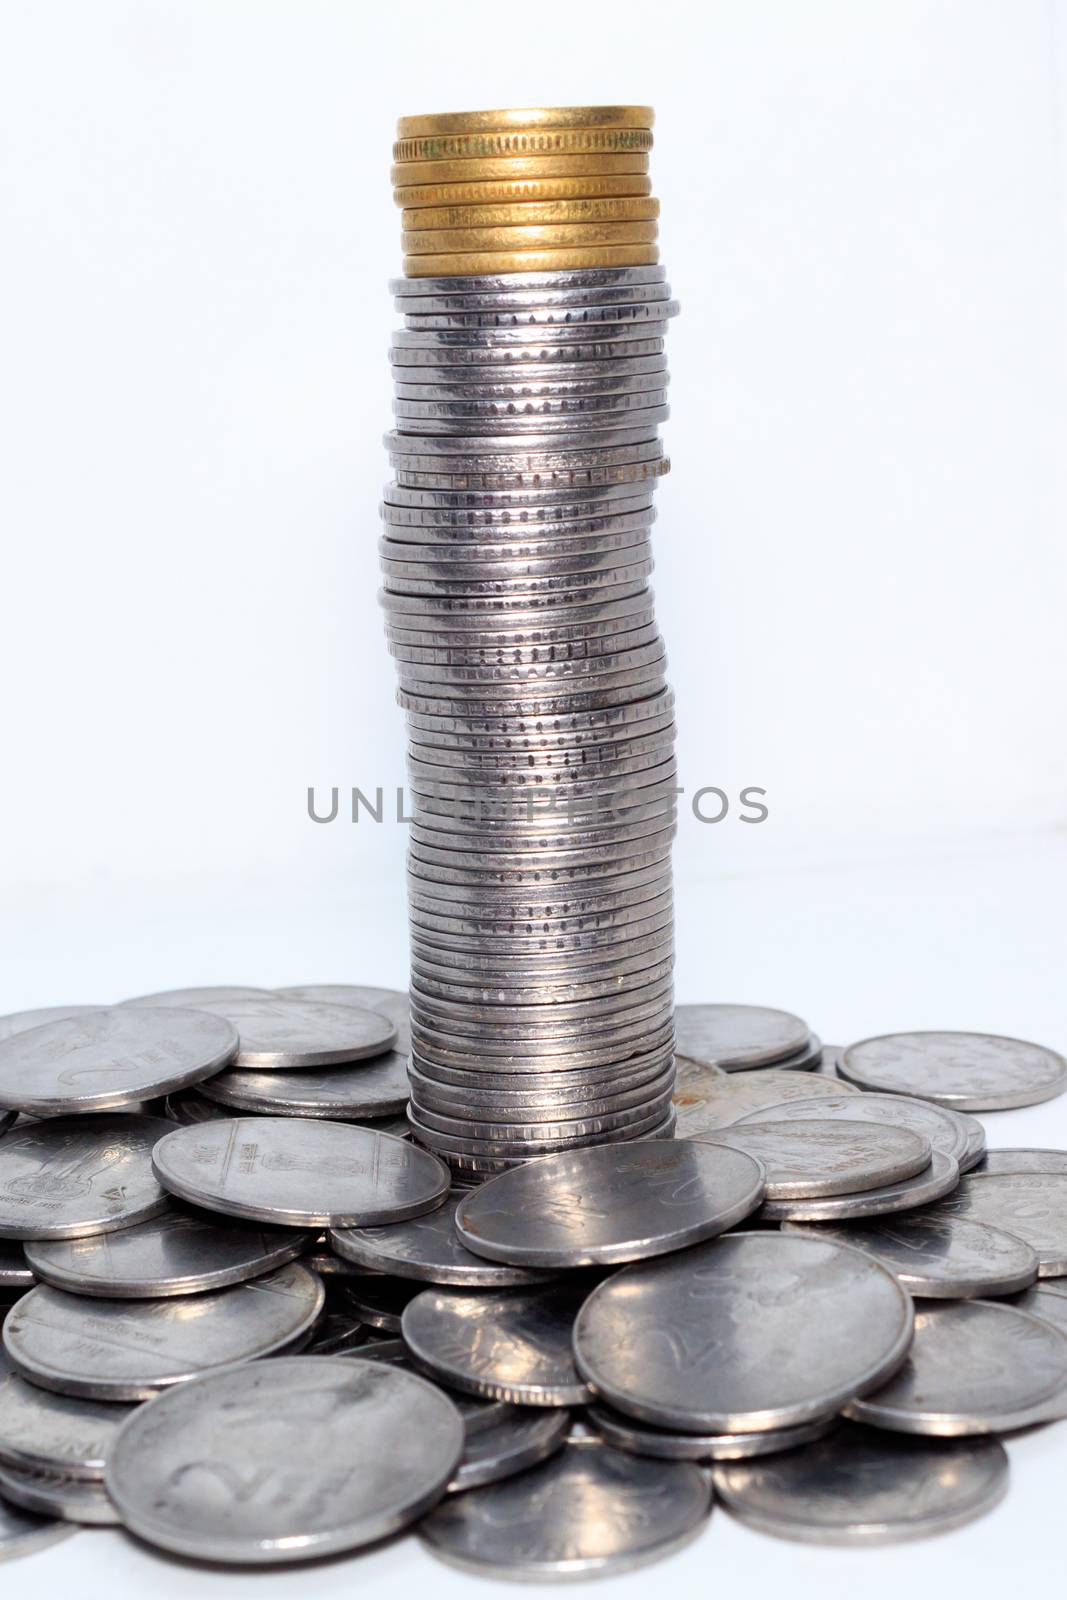 Stock pile of Hundred number 1, 10, 5 Indian rupee metal coin currency on isolated background. Financial, economy, investment concept. Banking and exchange object. by sudiptabhowmick